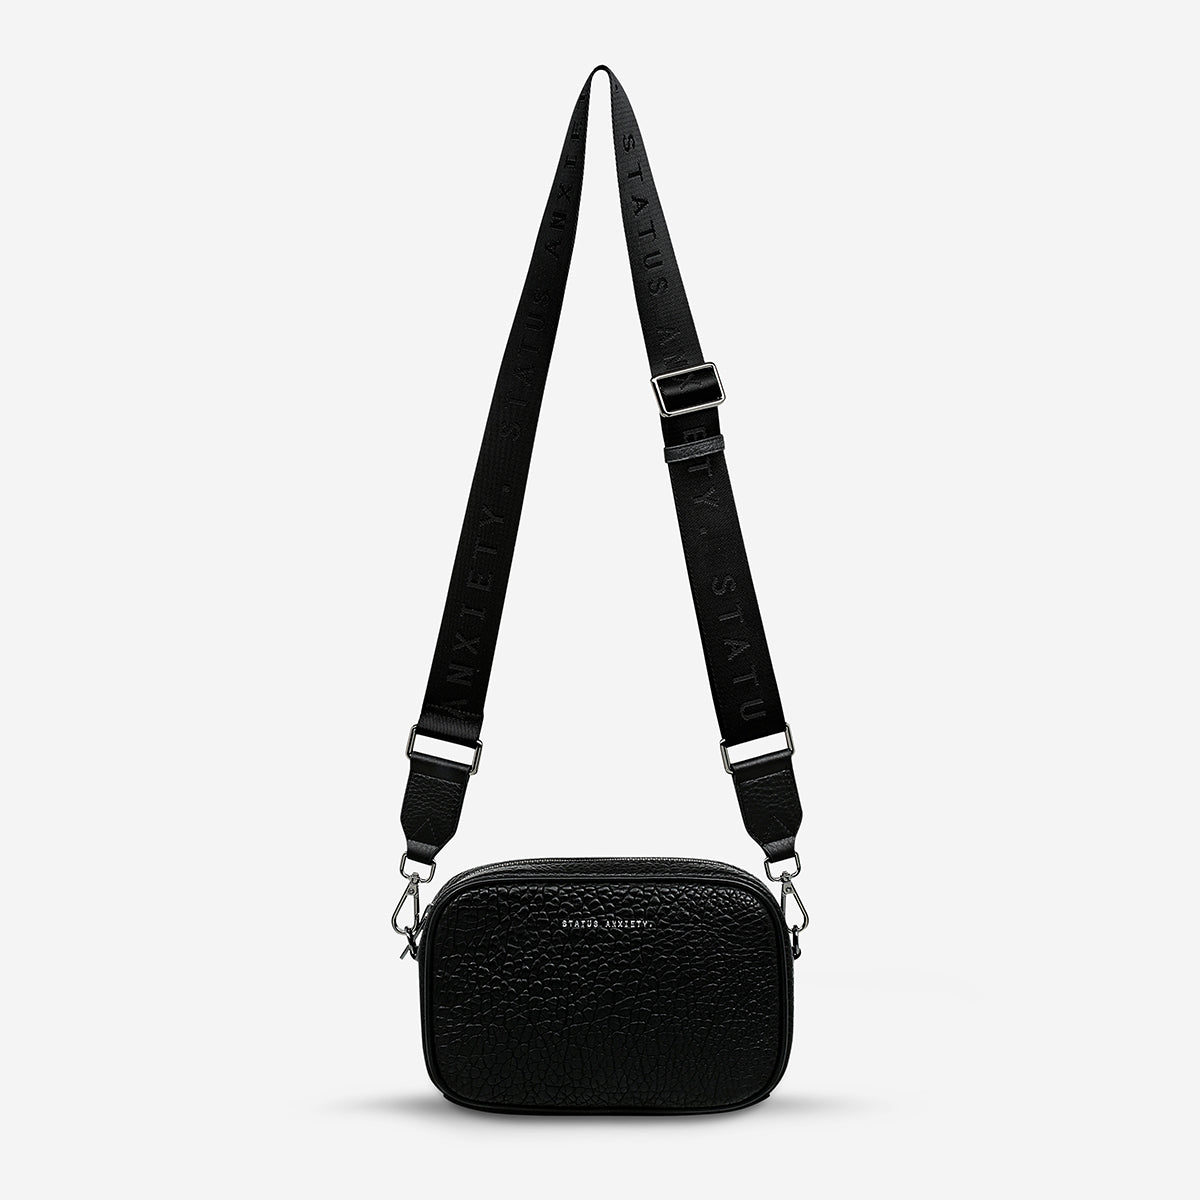 Plunder With Webbed Strap - Black Bubble